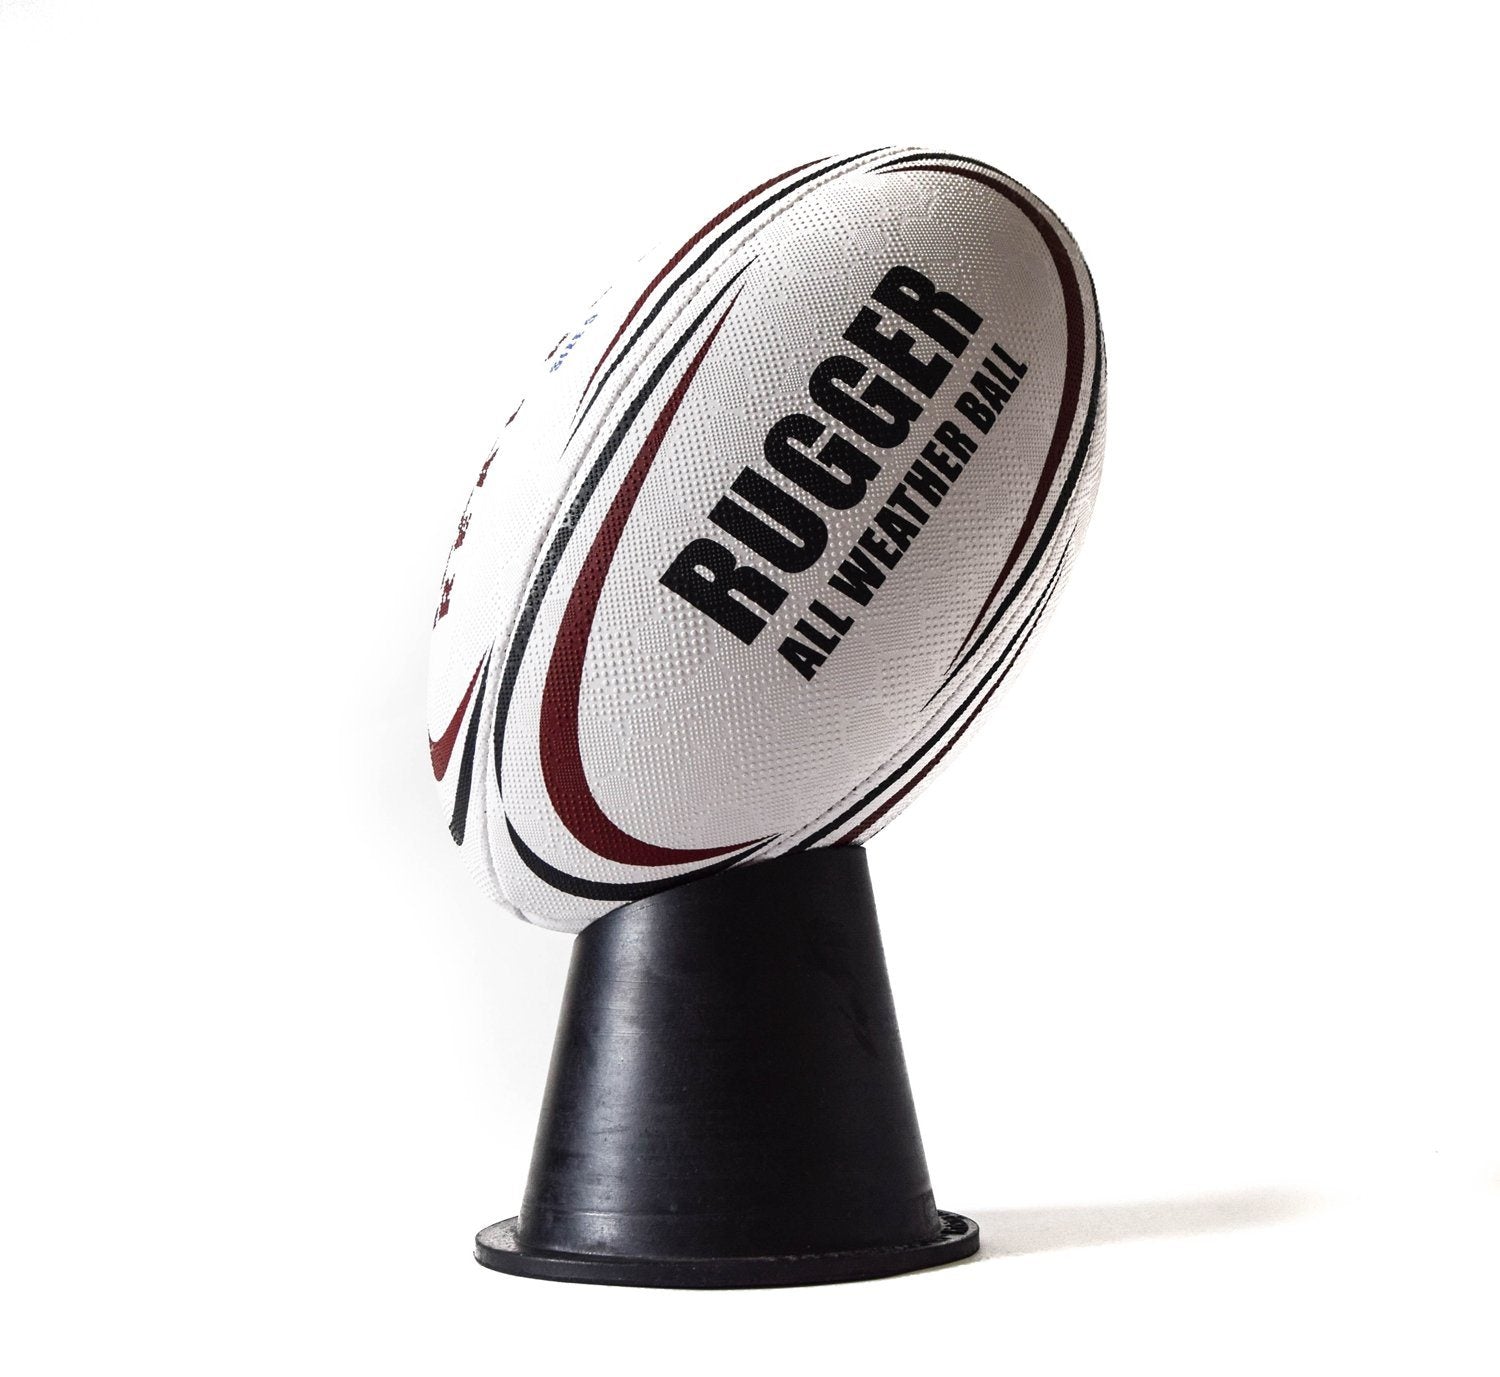 Accessories - Sharp Shooter Rugby Kicking Tee